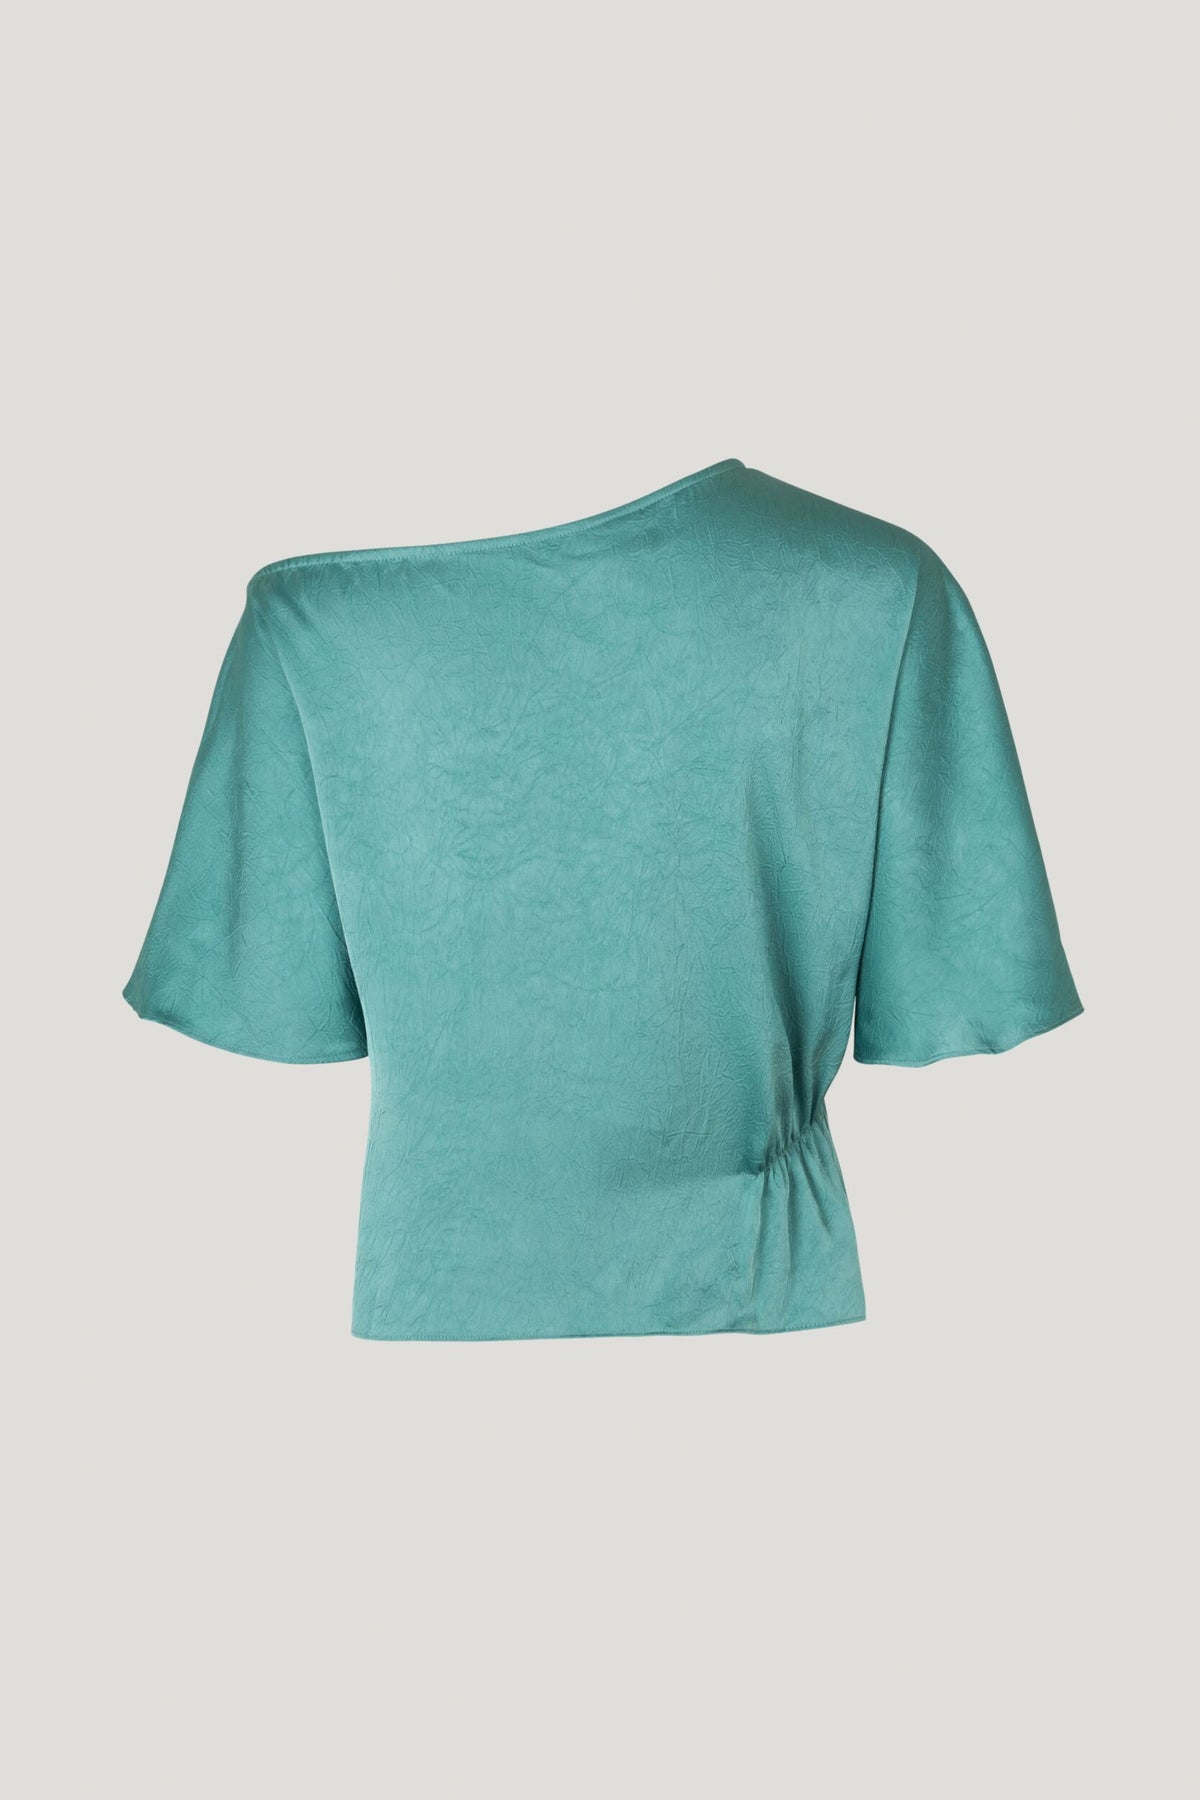 Asymmetrical blue green textured satin short sleeved top with elasticated side detail